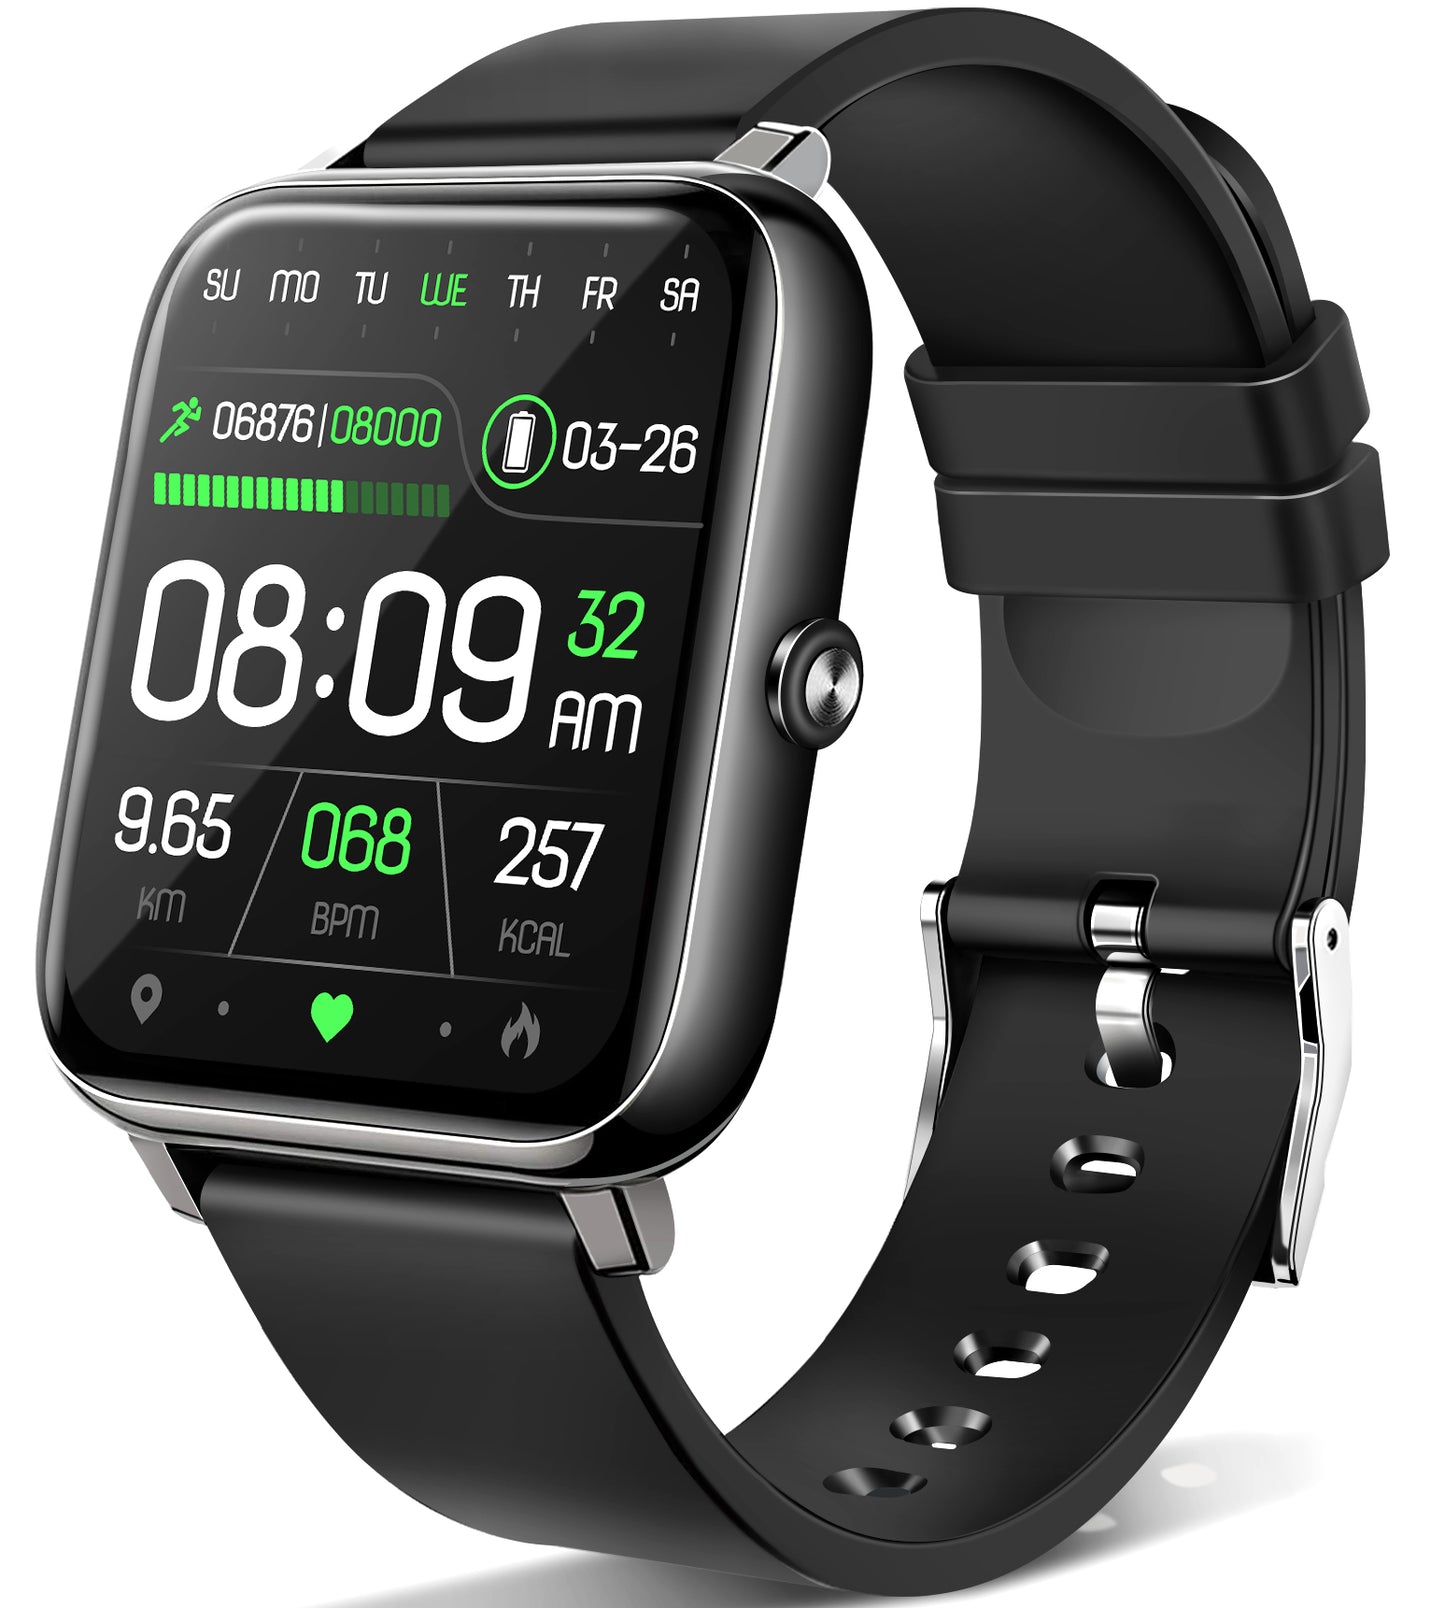 ANCwear F97-1.69" Touch Screen/Pedometer/Blood Pressure and Heart Rate Monitor/ IP68 Waterproof/Compatible Android IOS